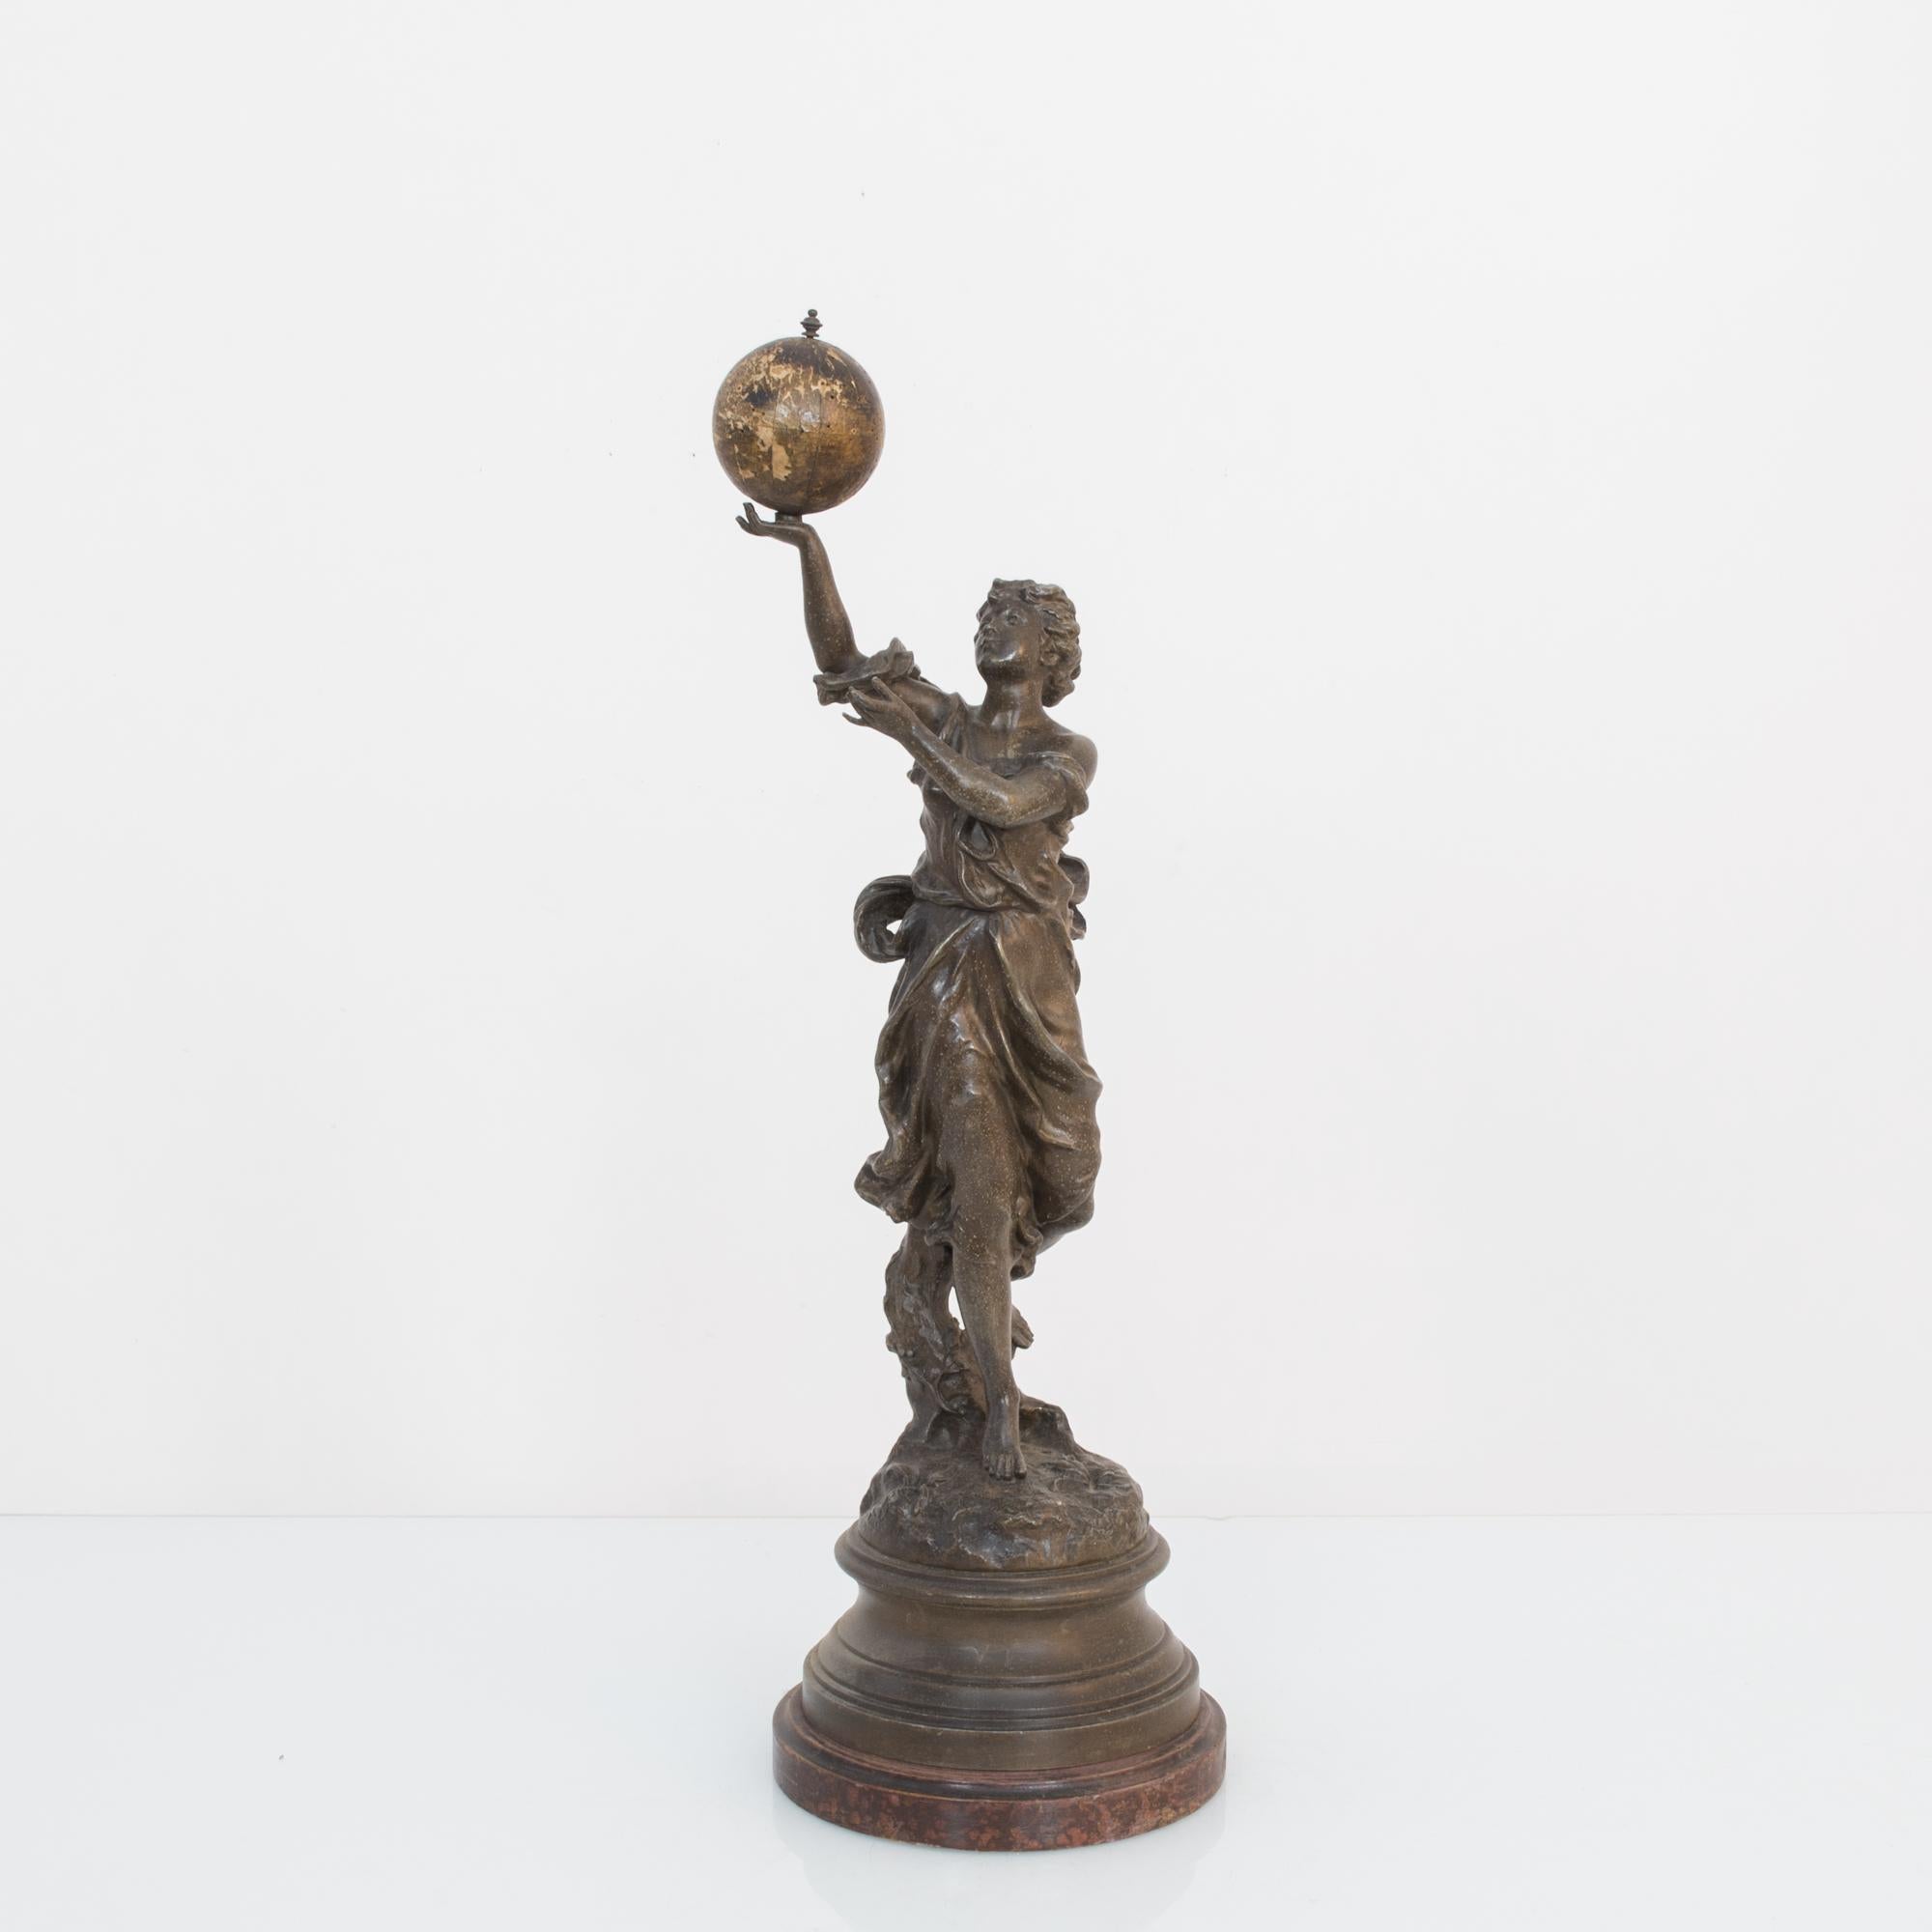 A bronze sculpture of a female figure created in France, circa 1900. This world toting muse is crafted in bronze with wooden accents, globe and socle. Her enchanted gaze gives us a moment of introspection on the world, our plans and travels, past